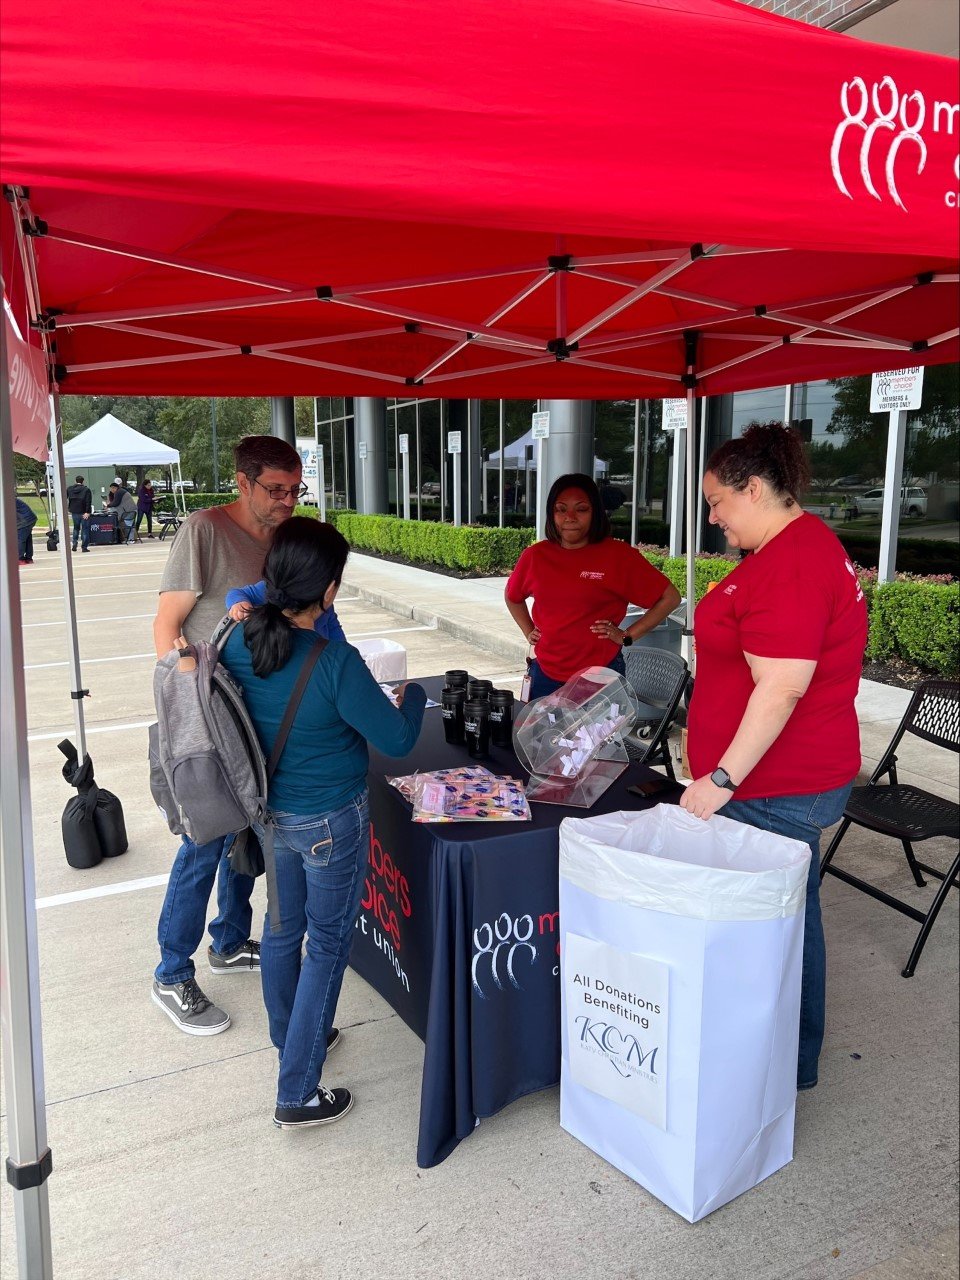 Members Choice Credit Union held its “Gather, Get, Give” event Nov. 5, where the community was invited to “gather,” “get” their confidential documents shredded, and “give” a donation to Katy Christian Ministries. About 1,780 pounds of food were gathered and donated.